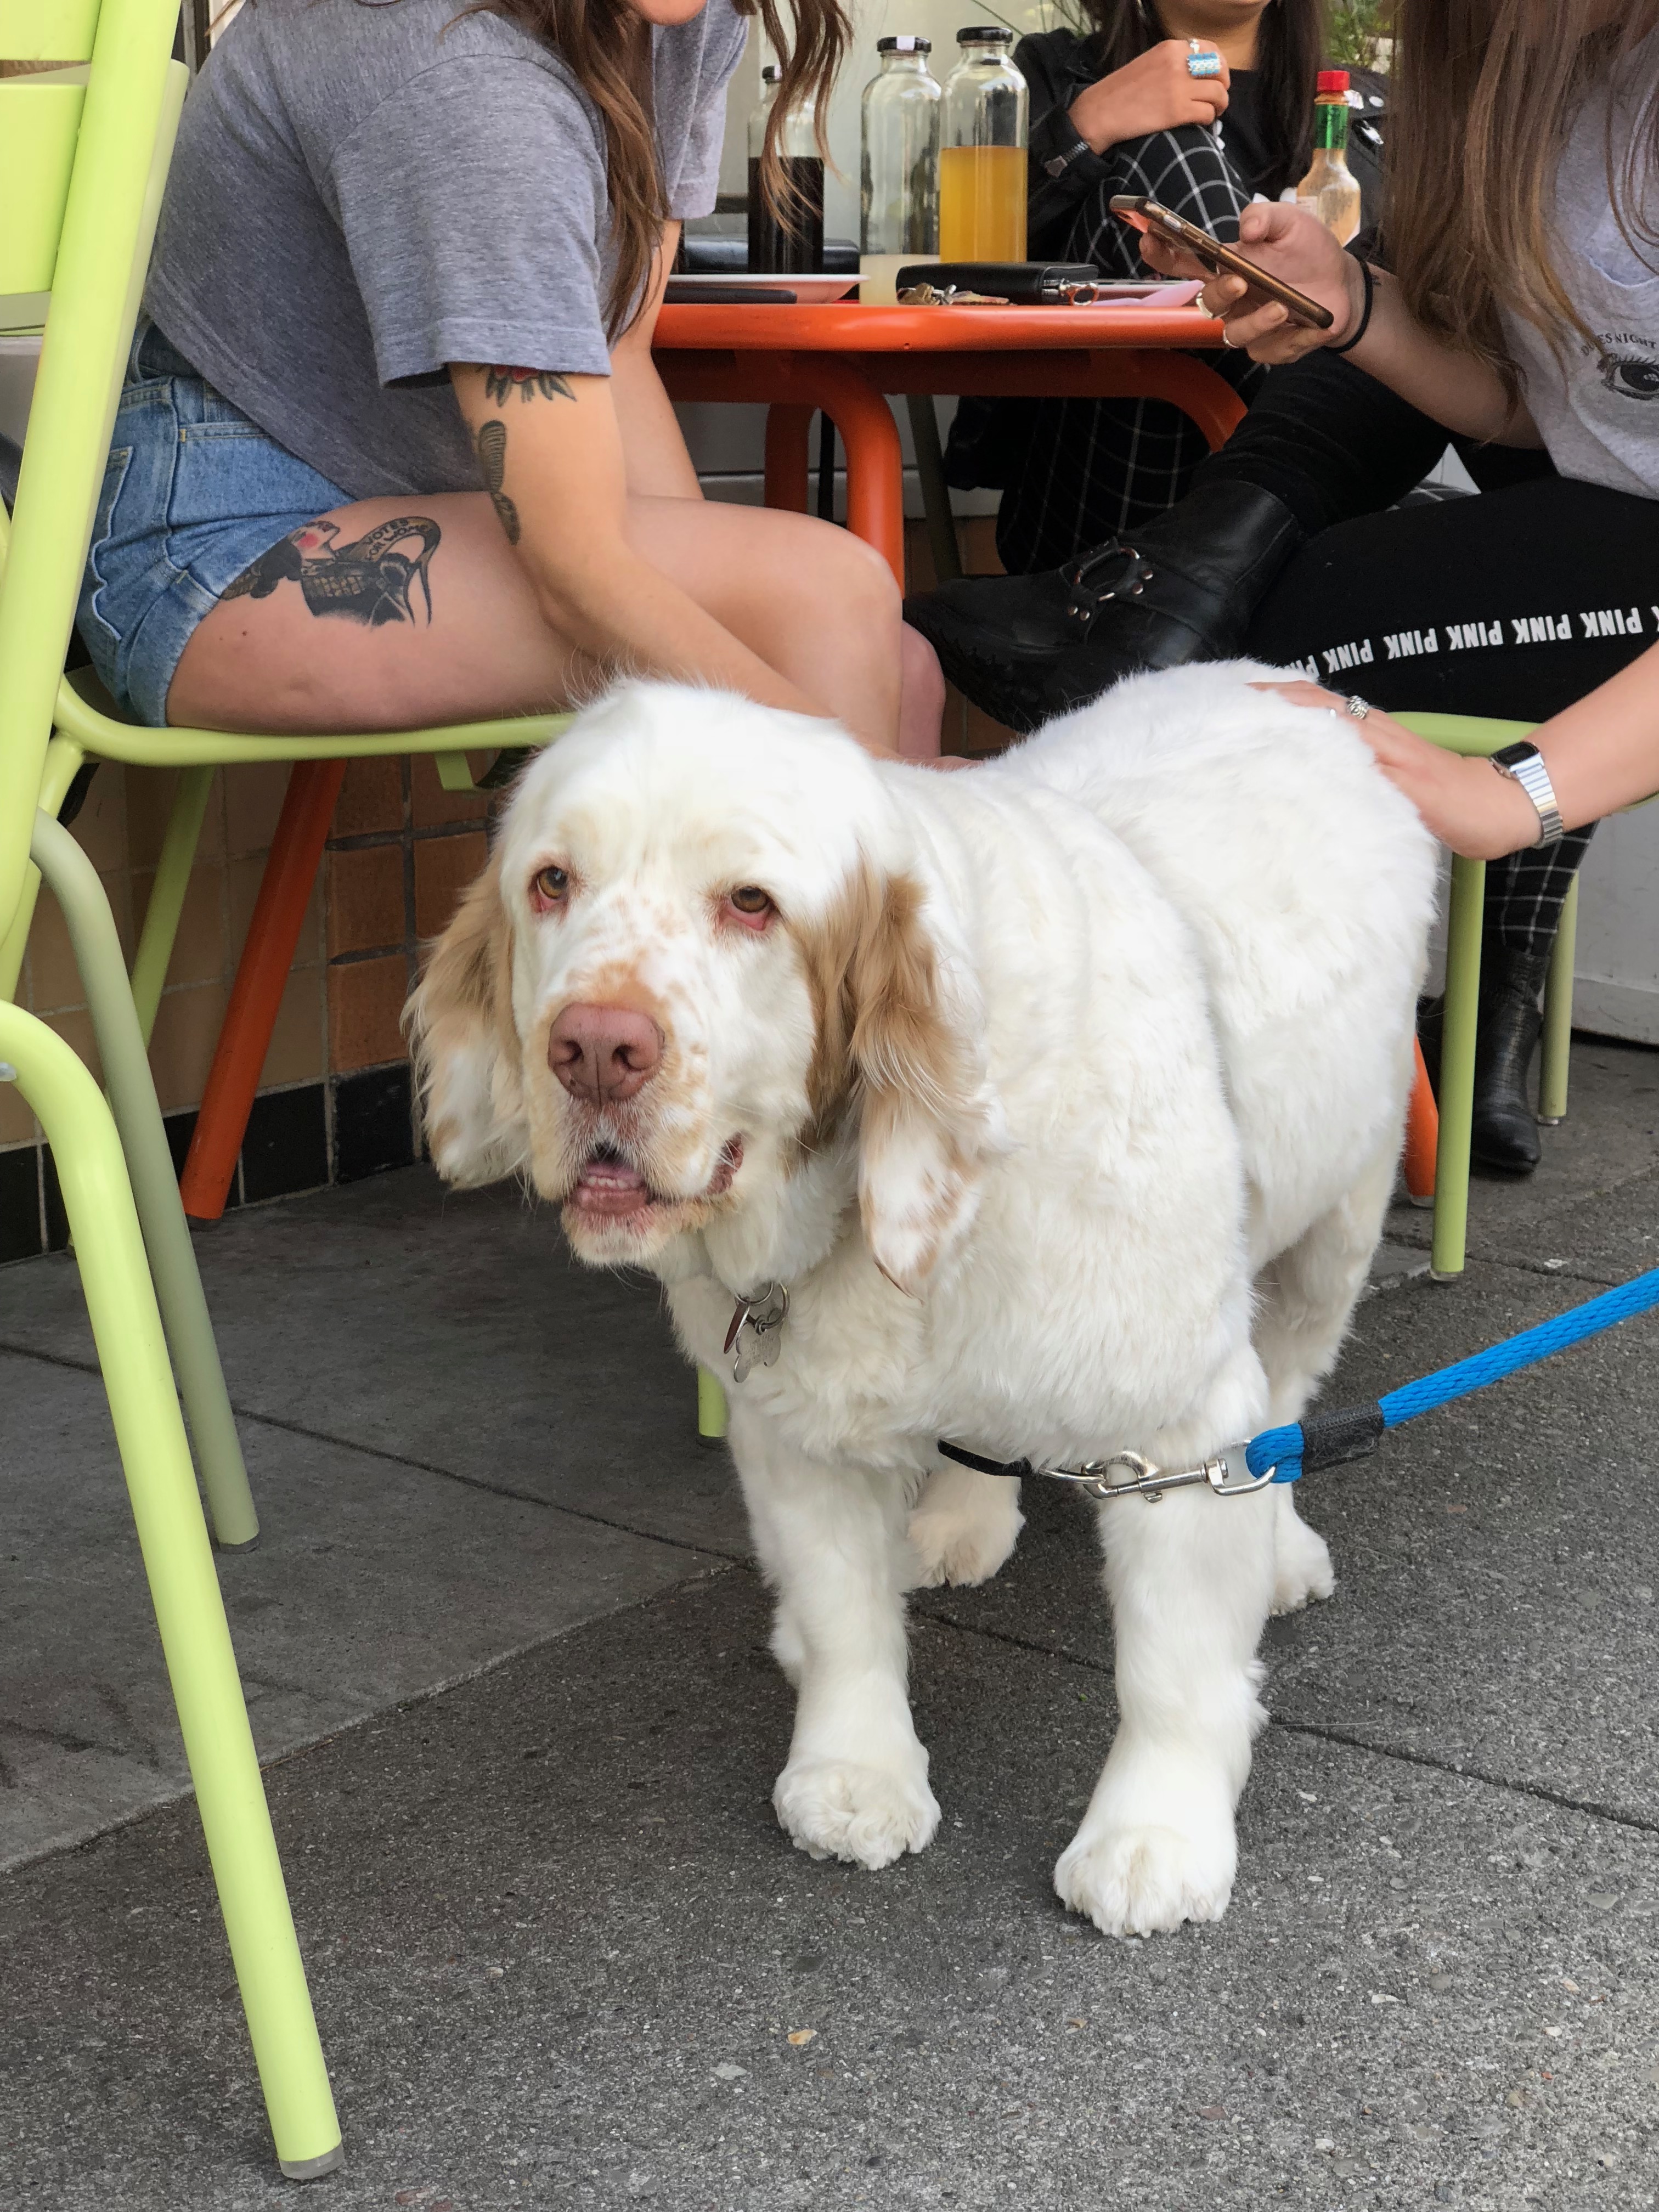 Mostly White Clumber Spaniel With A Little Brown, Smiling At The Camera As She Gets Her Butt Scratched